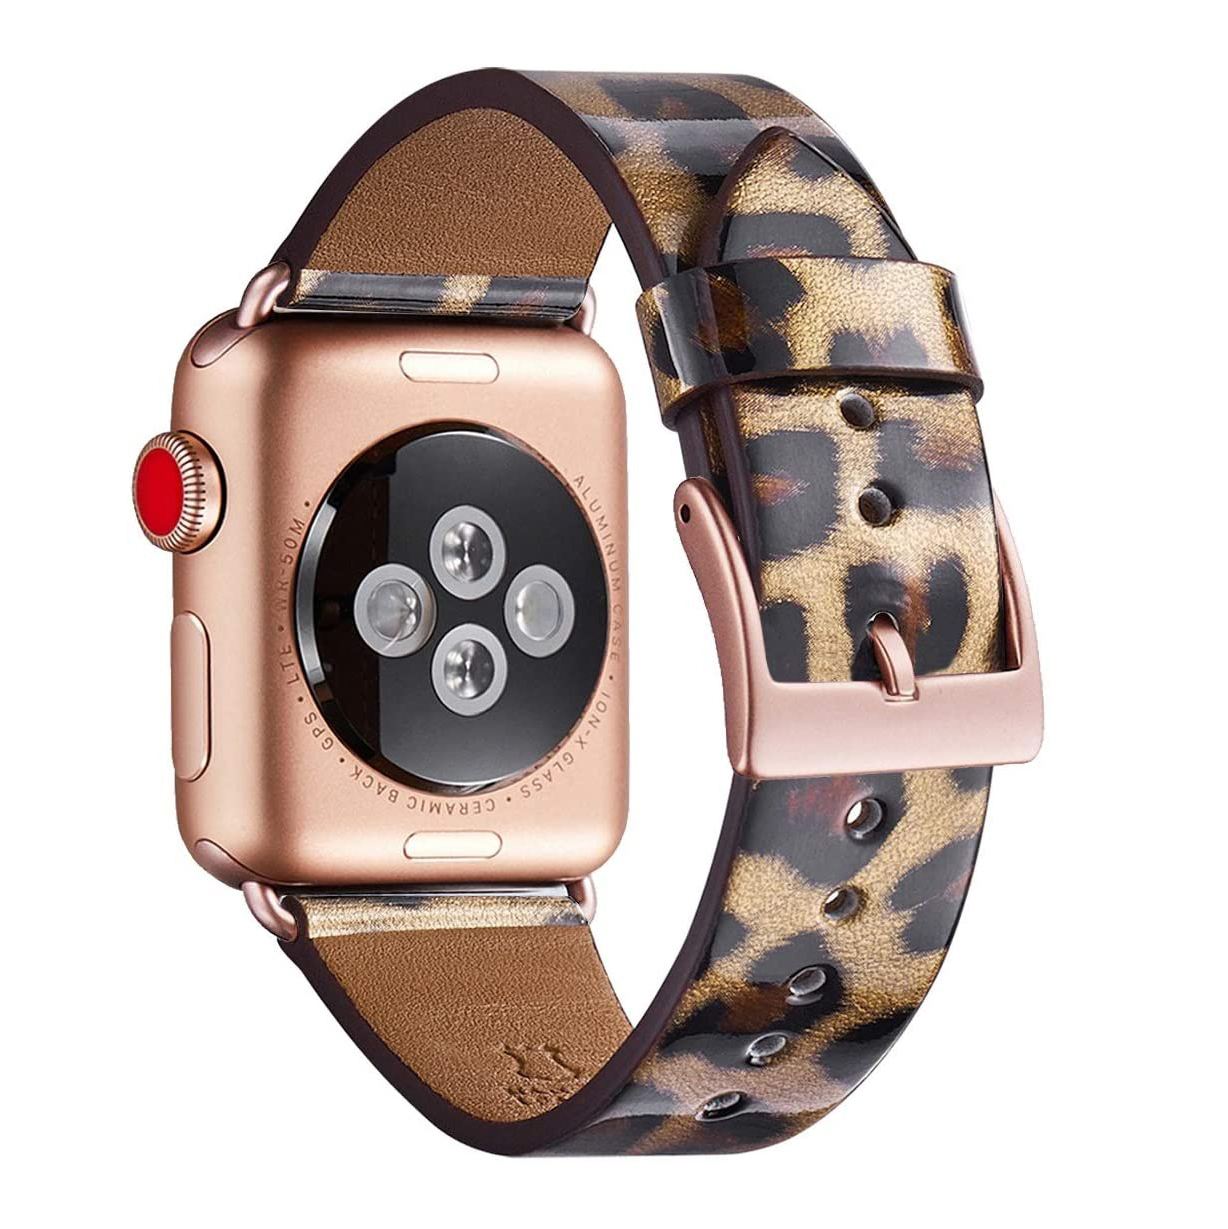  (Lovely Corgi and Paw Footprint Pattern) Patterned Leather  Wristband Strap Compatible with Apple Watch Series 4/3/2/1 gen,Replacement  of iWatch 38mm / 40mm Bands : Cell Phones & Accessories